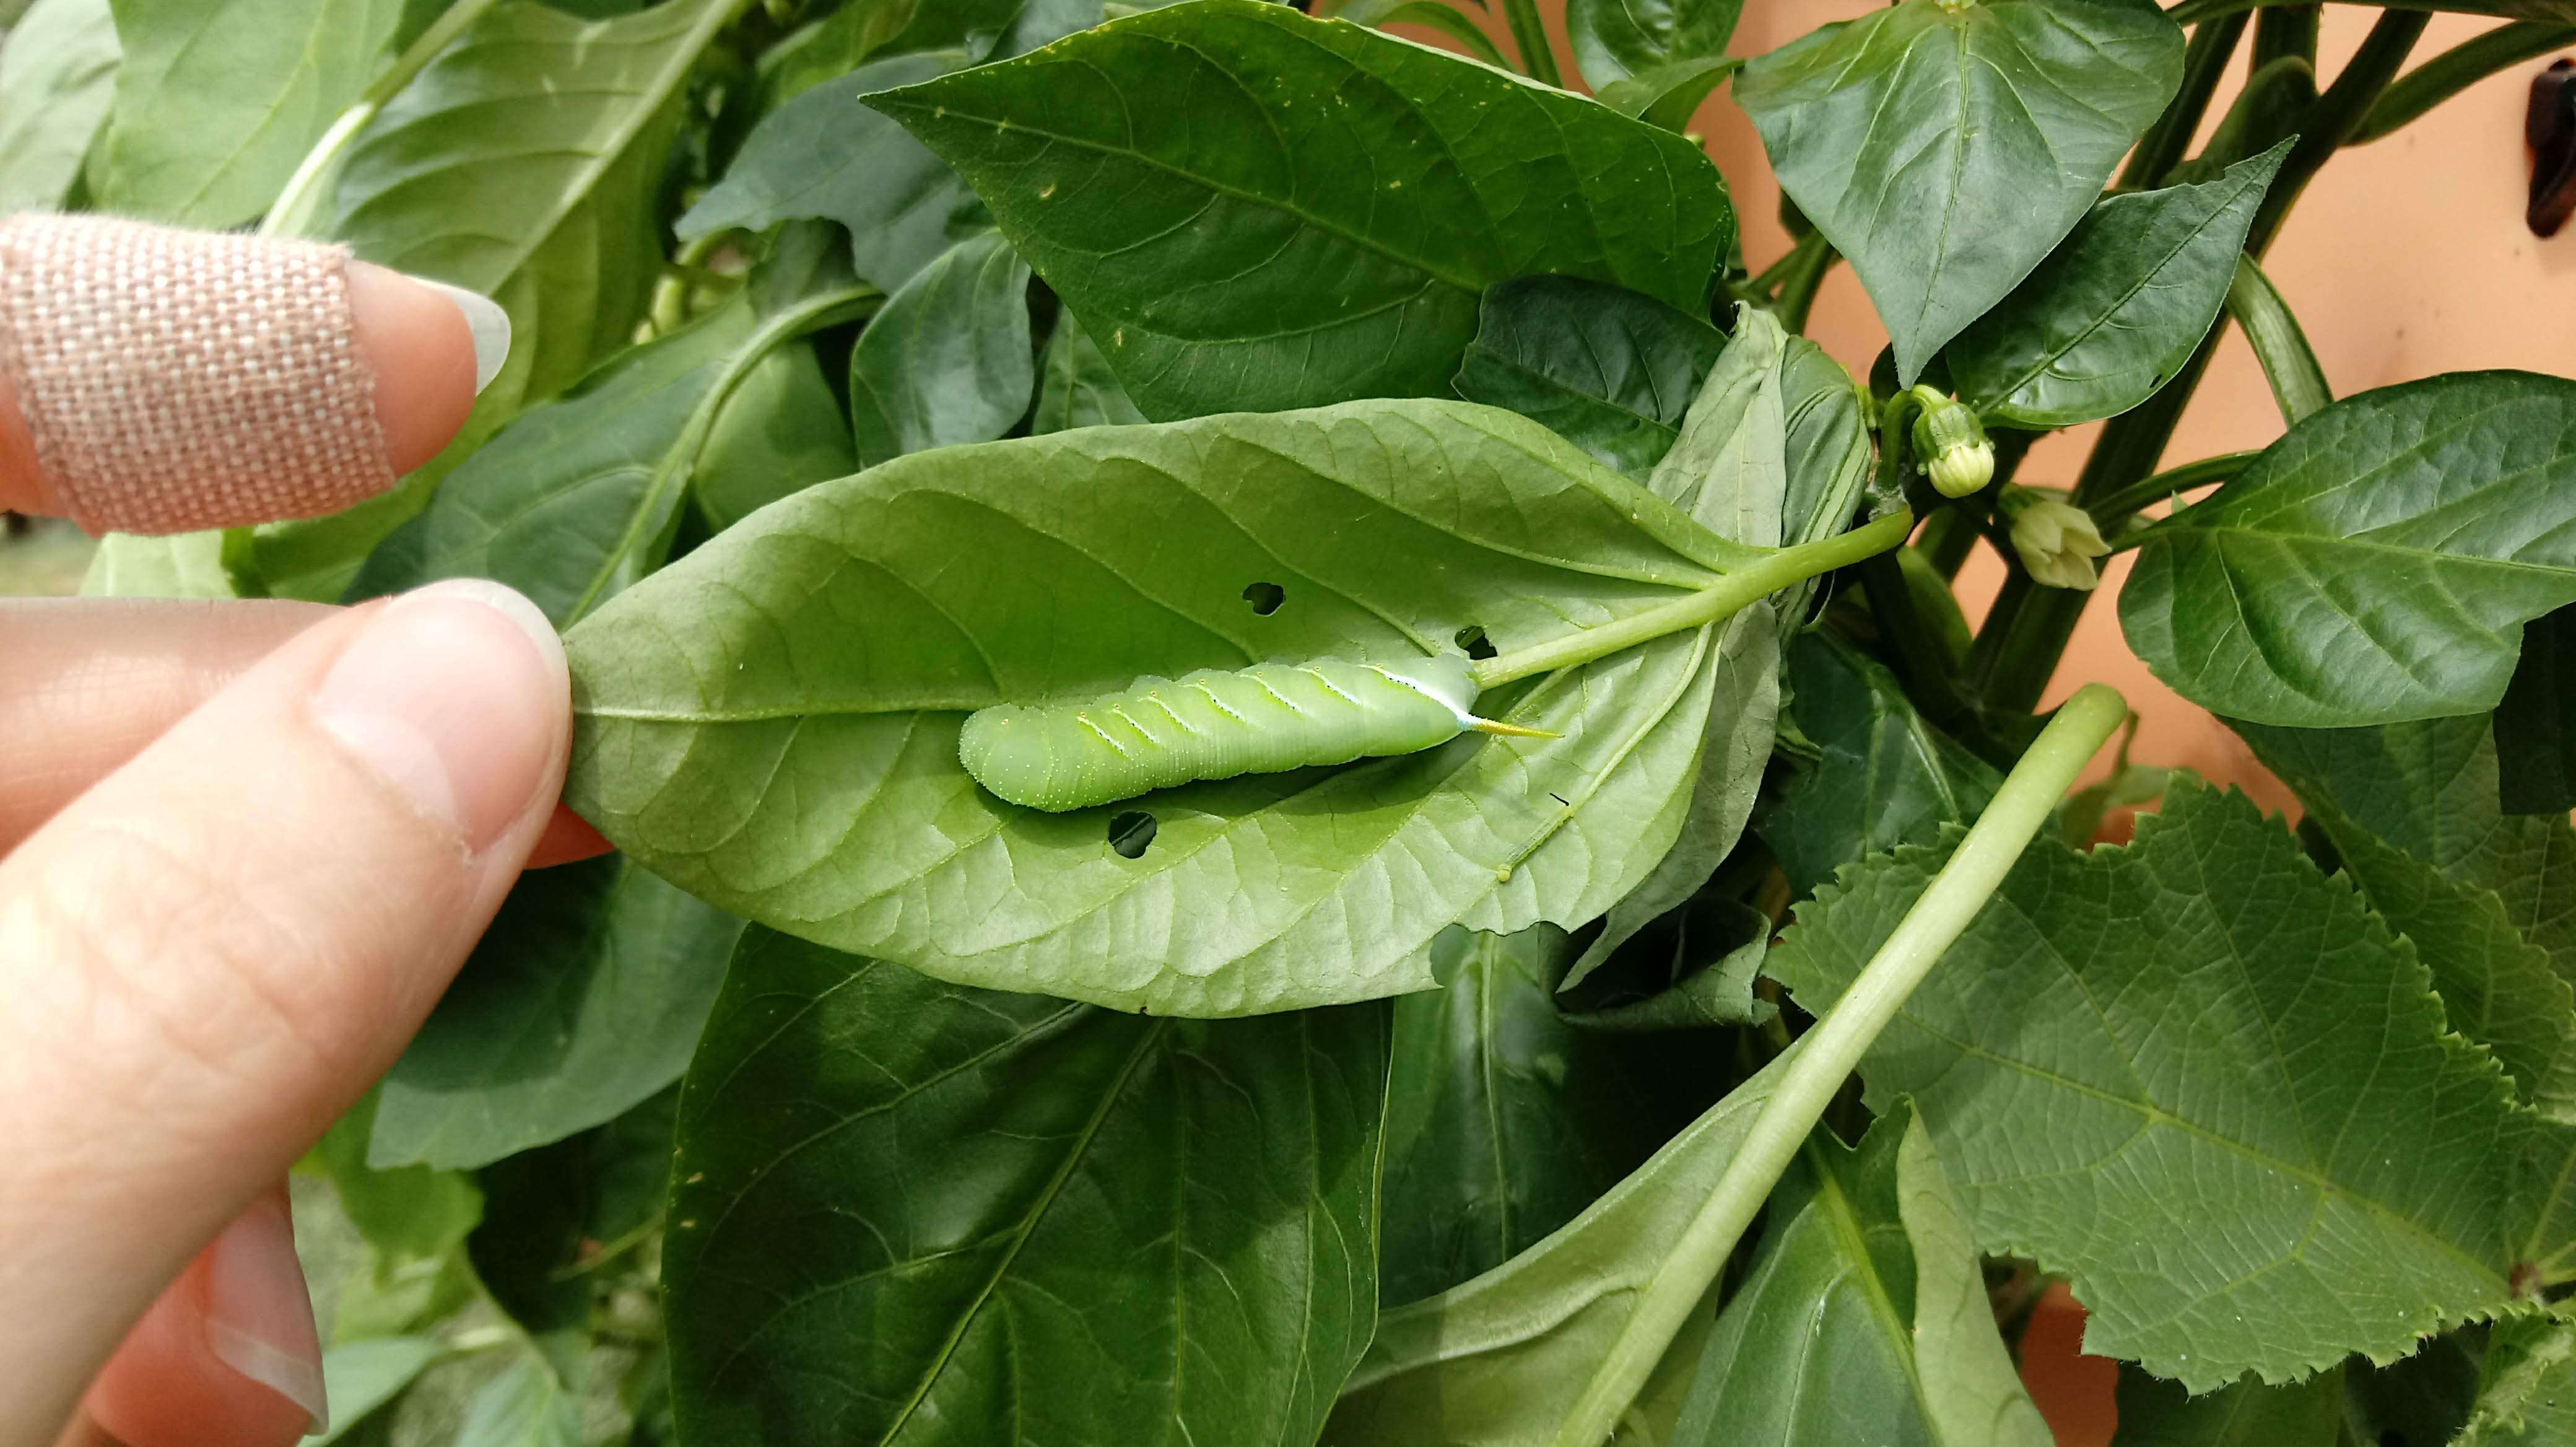 Hornworm on peppers